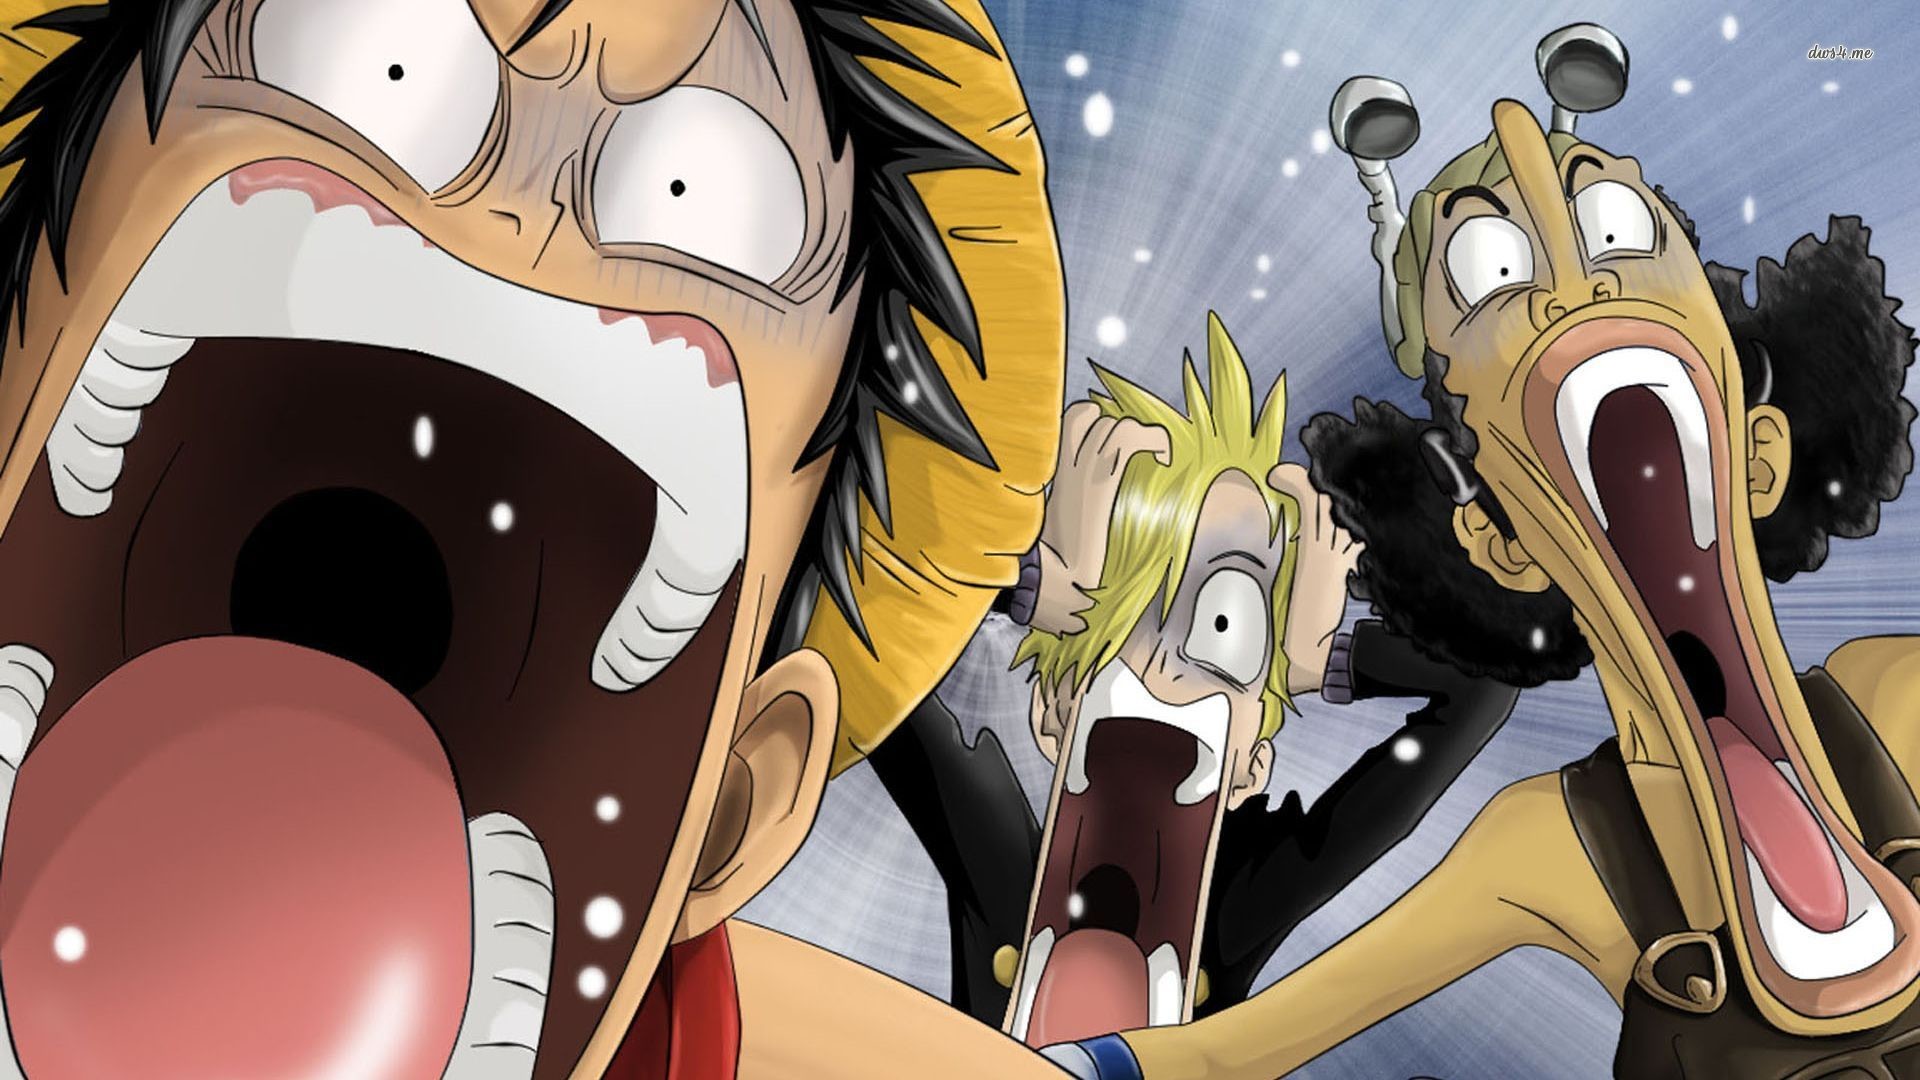 1920x1080 One Piece: "Straw Hat" Monkey D. Luffy / Characters ...